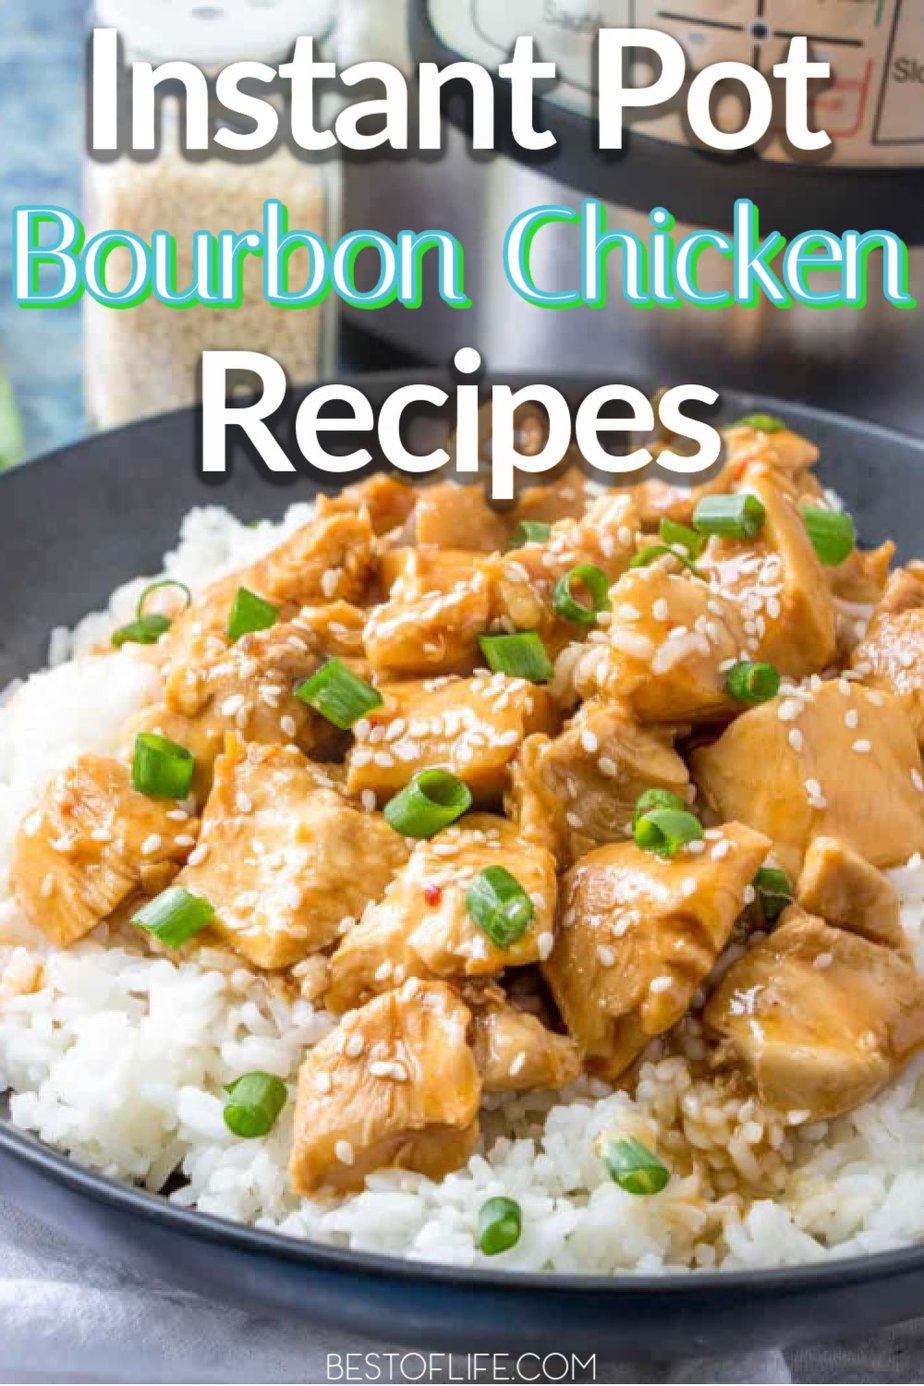 Making Instant Pot bourbon chicken recipes for a family dinner recipe, dinner party recipe, or even as a make ahead meal will speed up your weekly meal prep. Saucy Chicken Instant Pot | Instant Pot Chicken Thighs | Bourbon Chicken Pressure Cooker | Instant Pot Dinner Recipes with Chicken | Easy Instant Pot Dinner Recipes | Chicken Pressure Cooker Recipes #instantpot #chicken